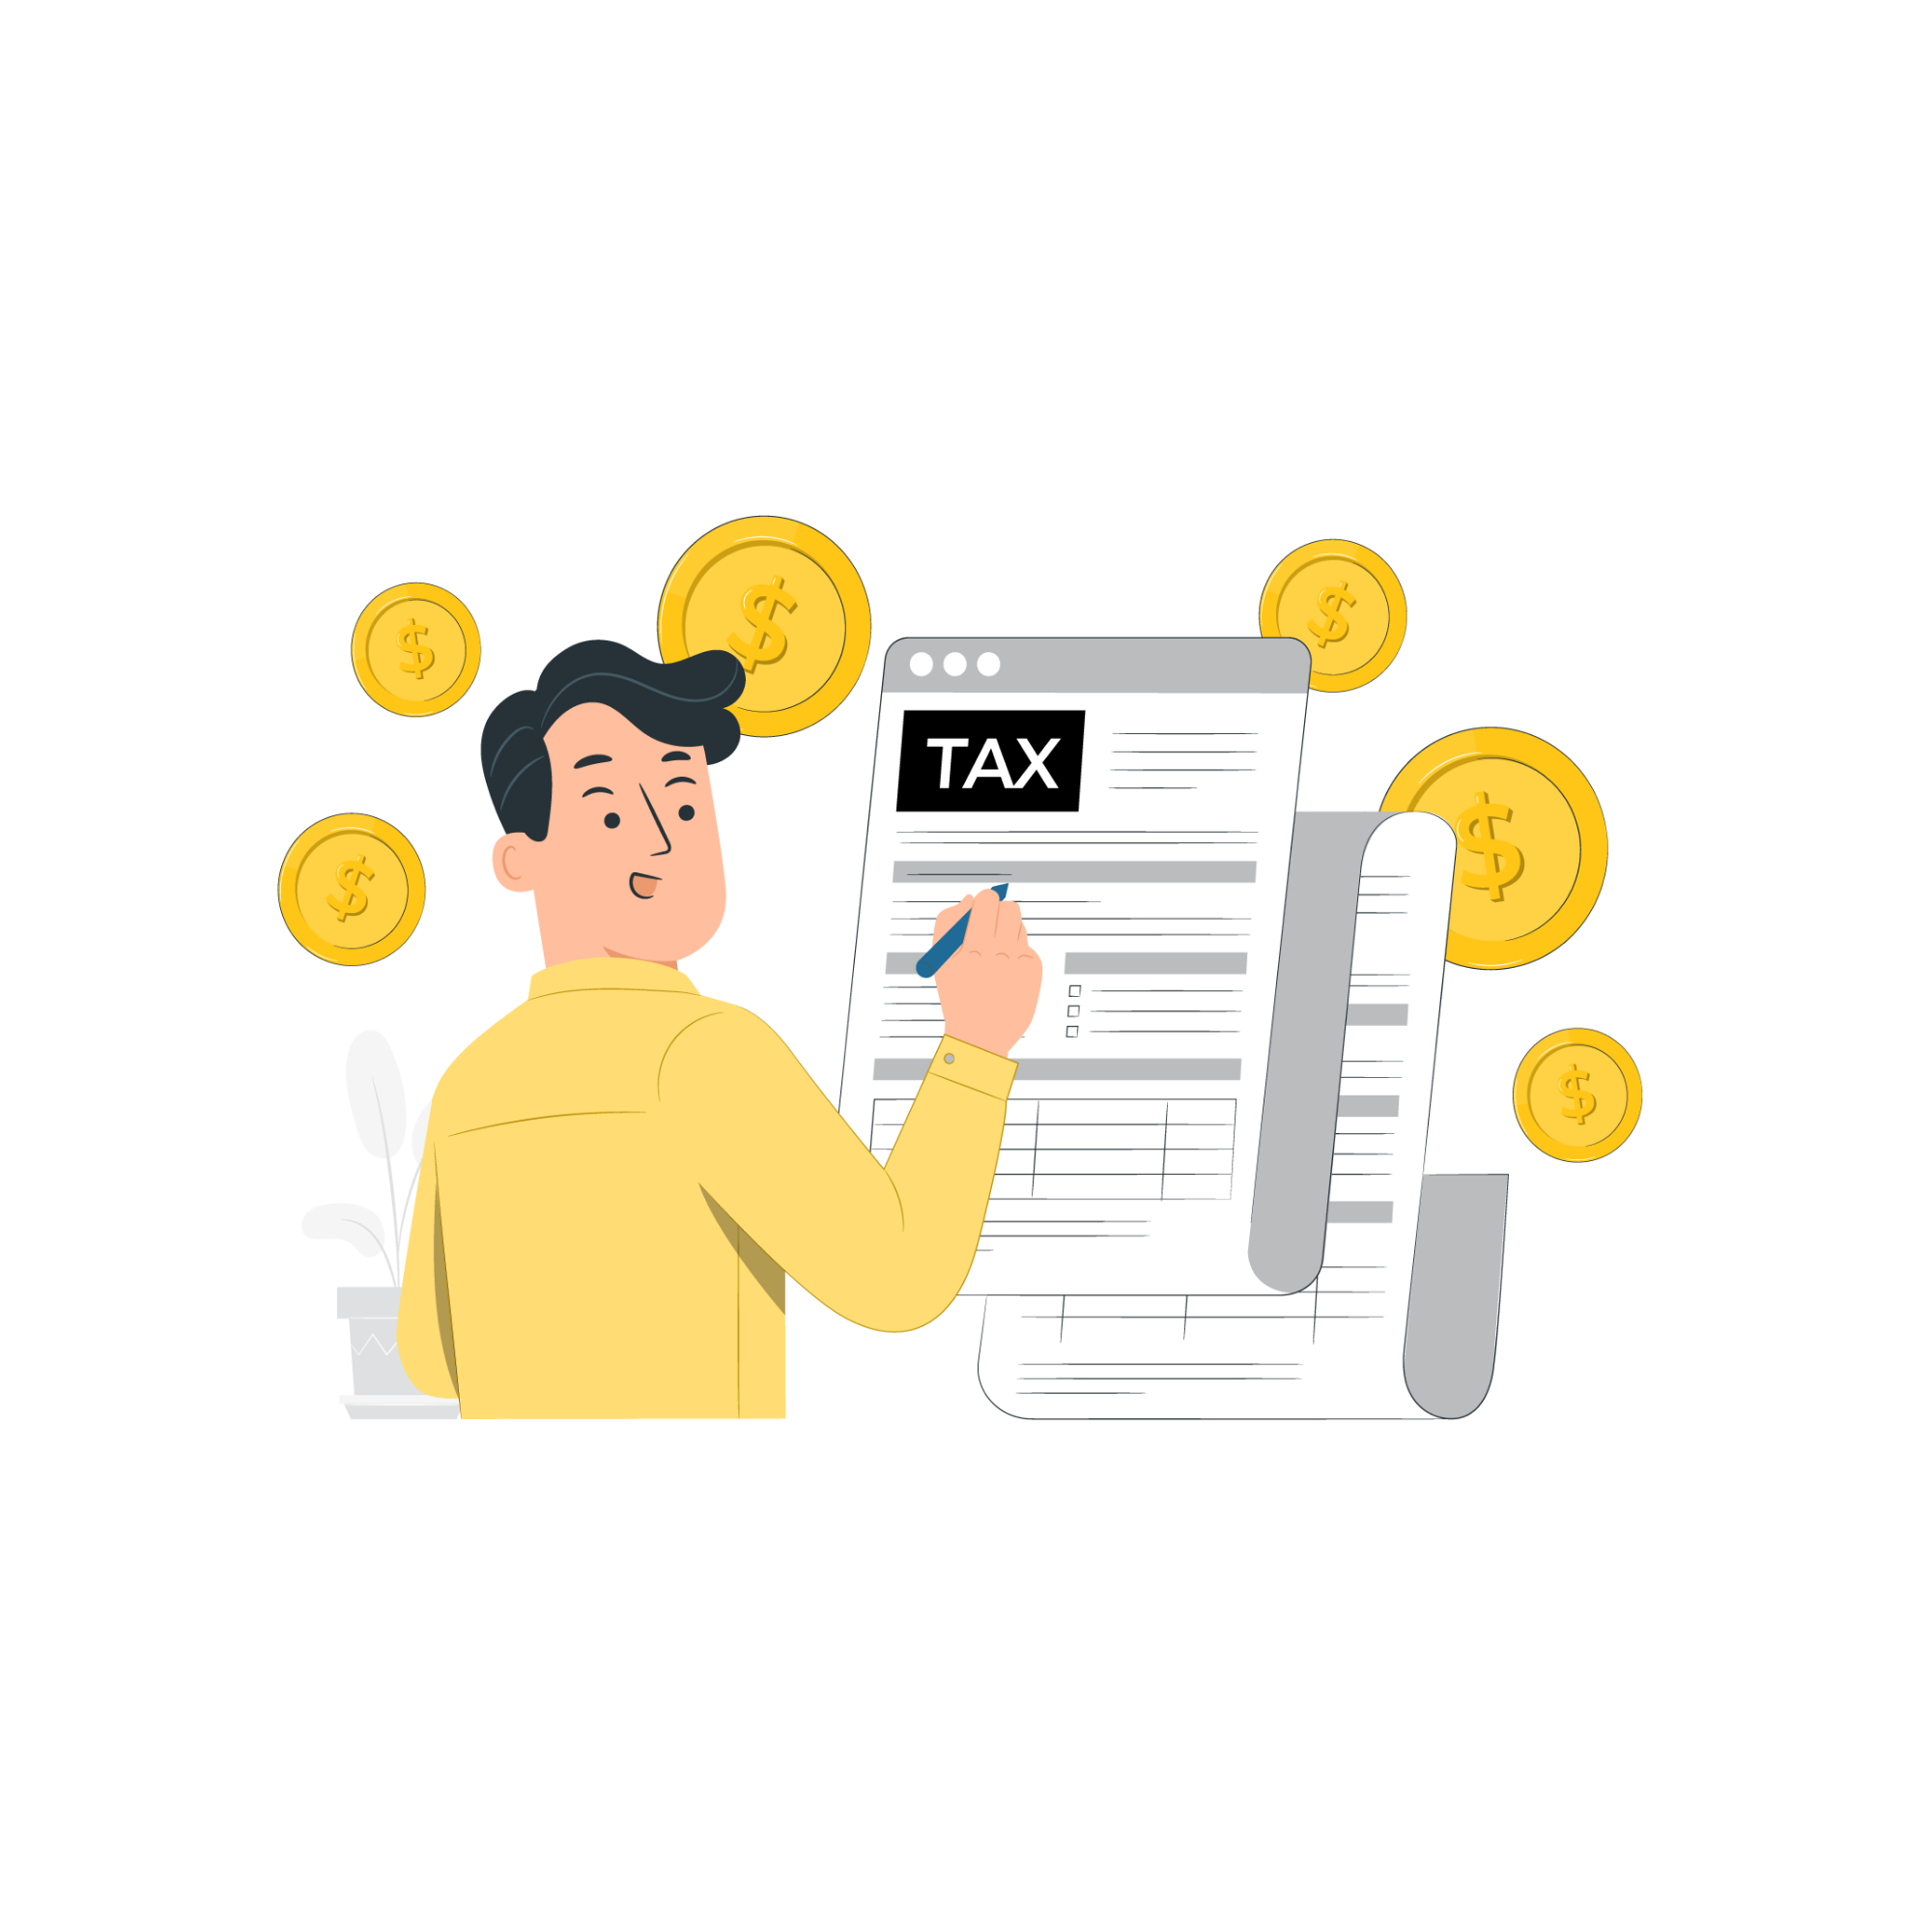 Free Tax Consultation for Small Businesses | Tentho Tax Experts Free Consultation